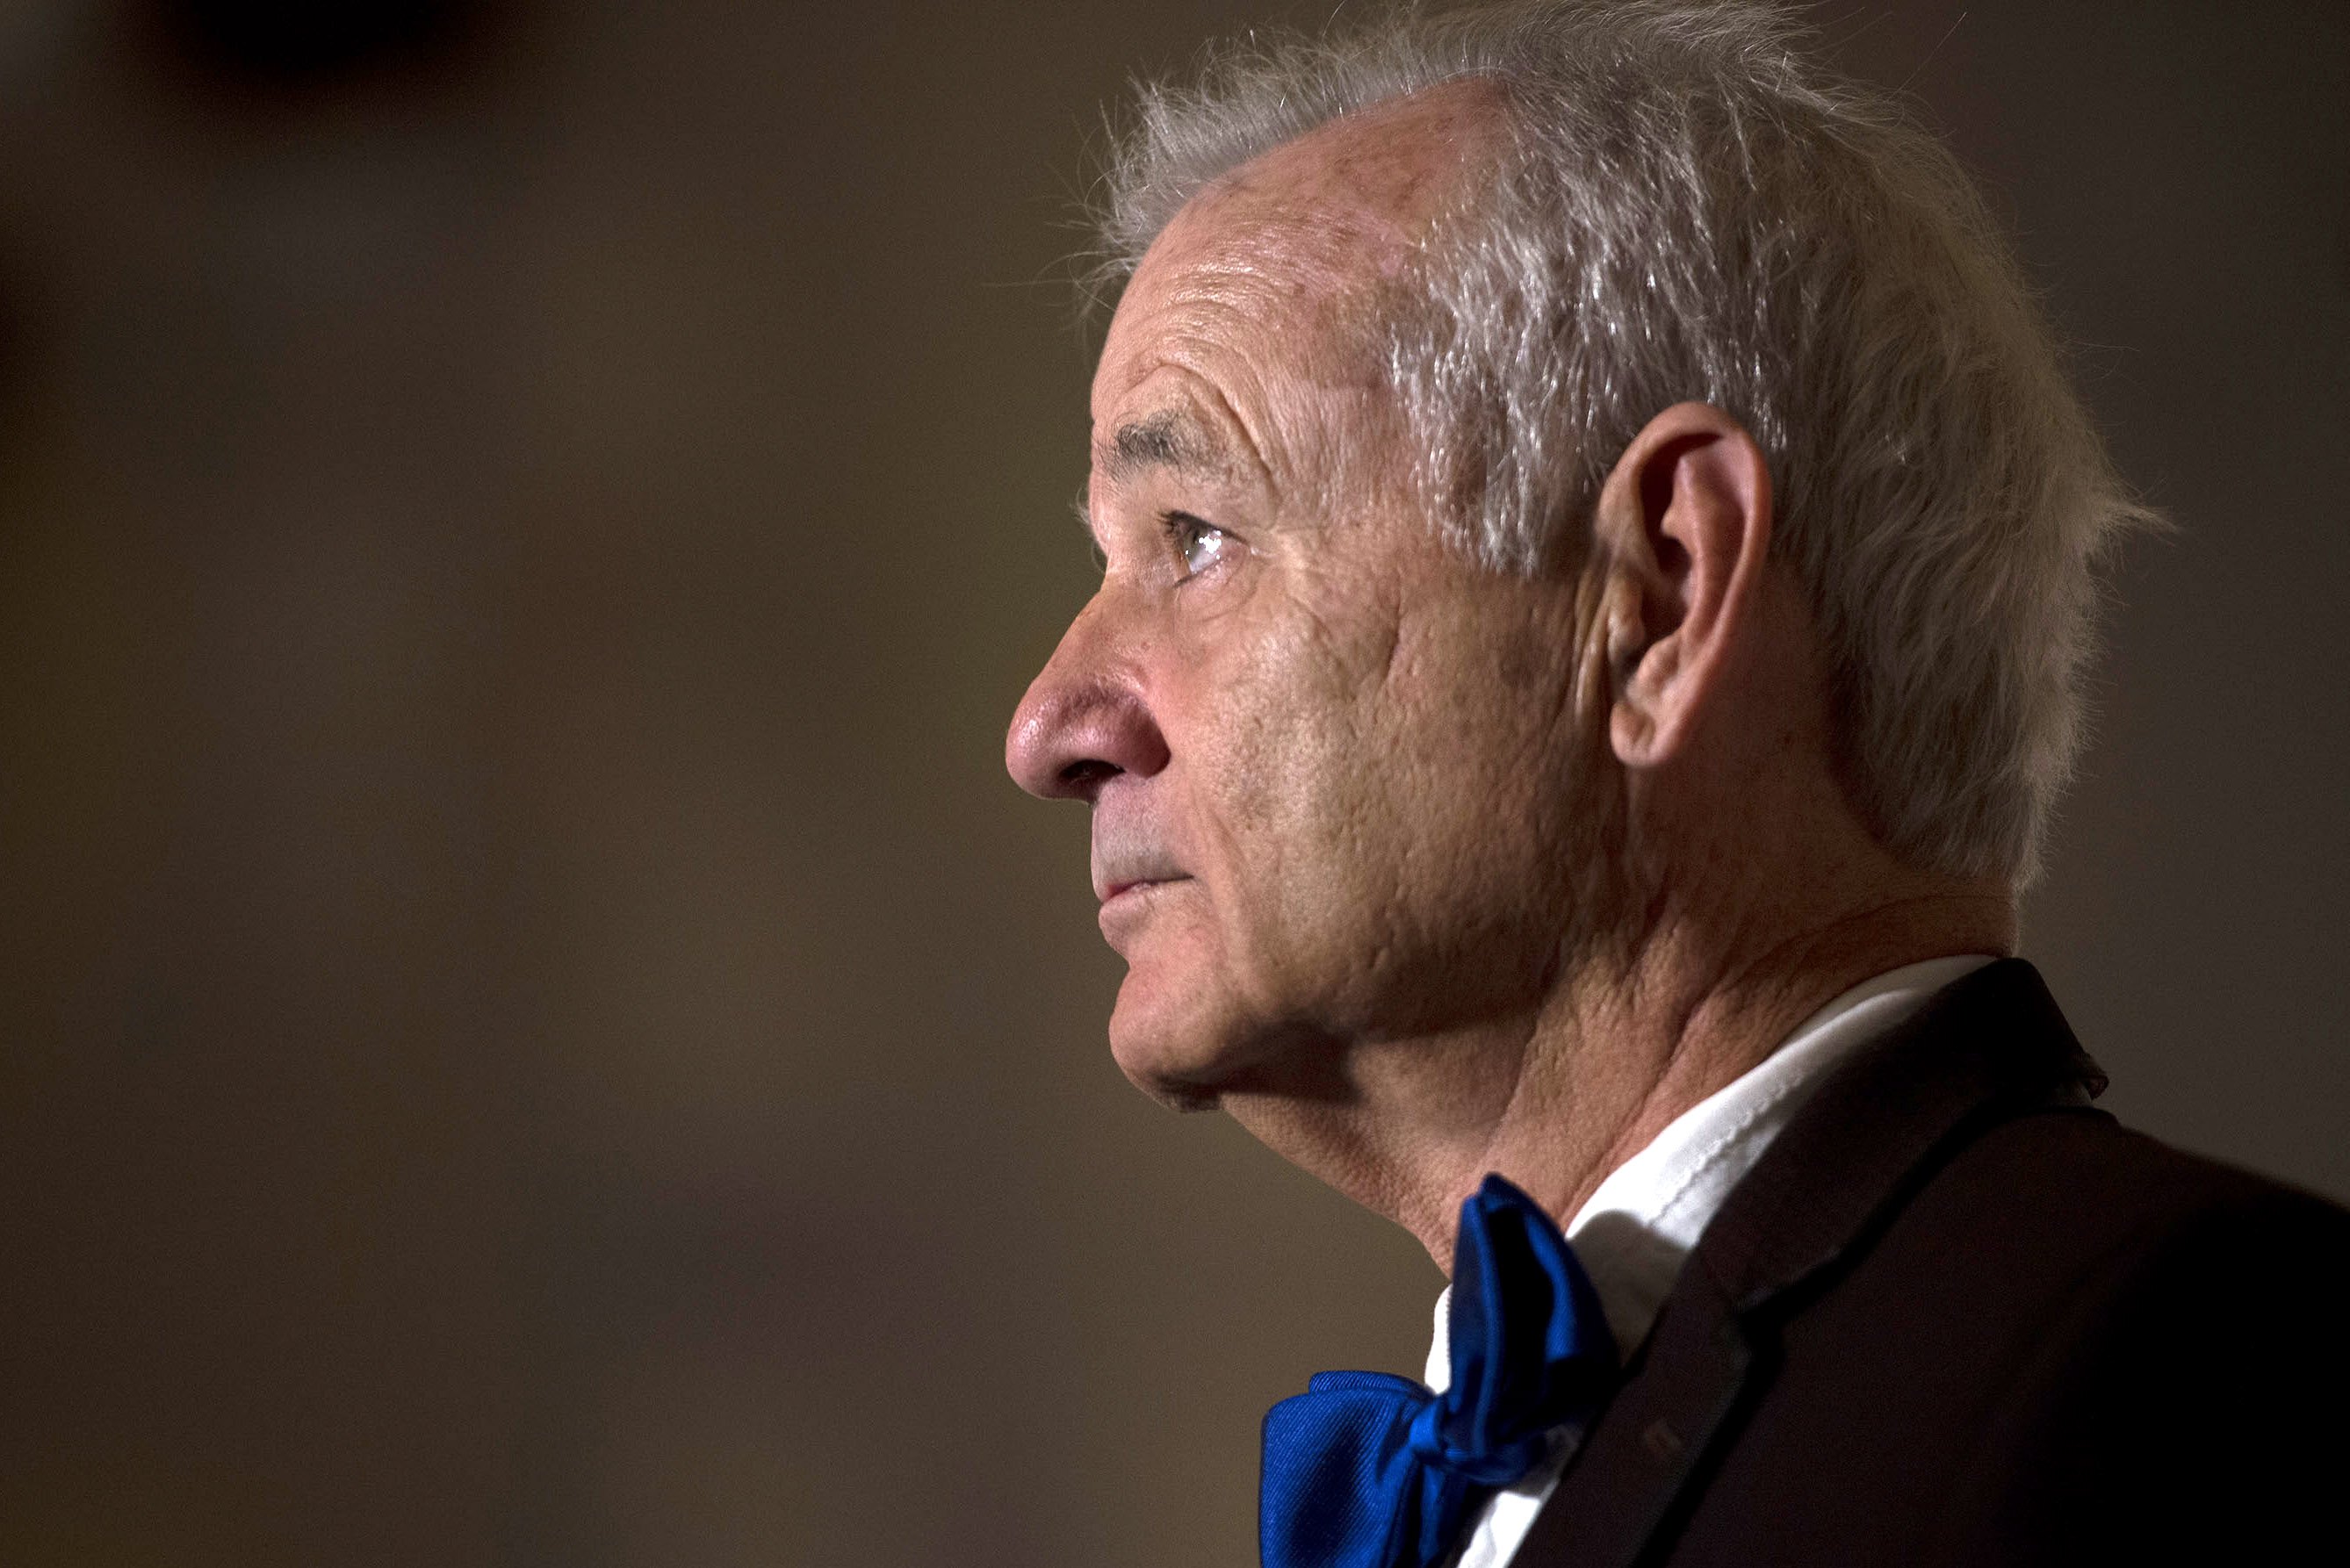 Bill Murray arrives at the Kennedy Center where the actor received the 19th Annual Mark Twain Prize on Oct. 23, 2016 in Washington, DC. (Leigh Vogel—Getty Images)